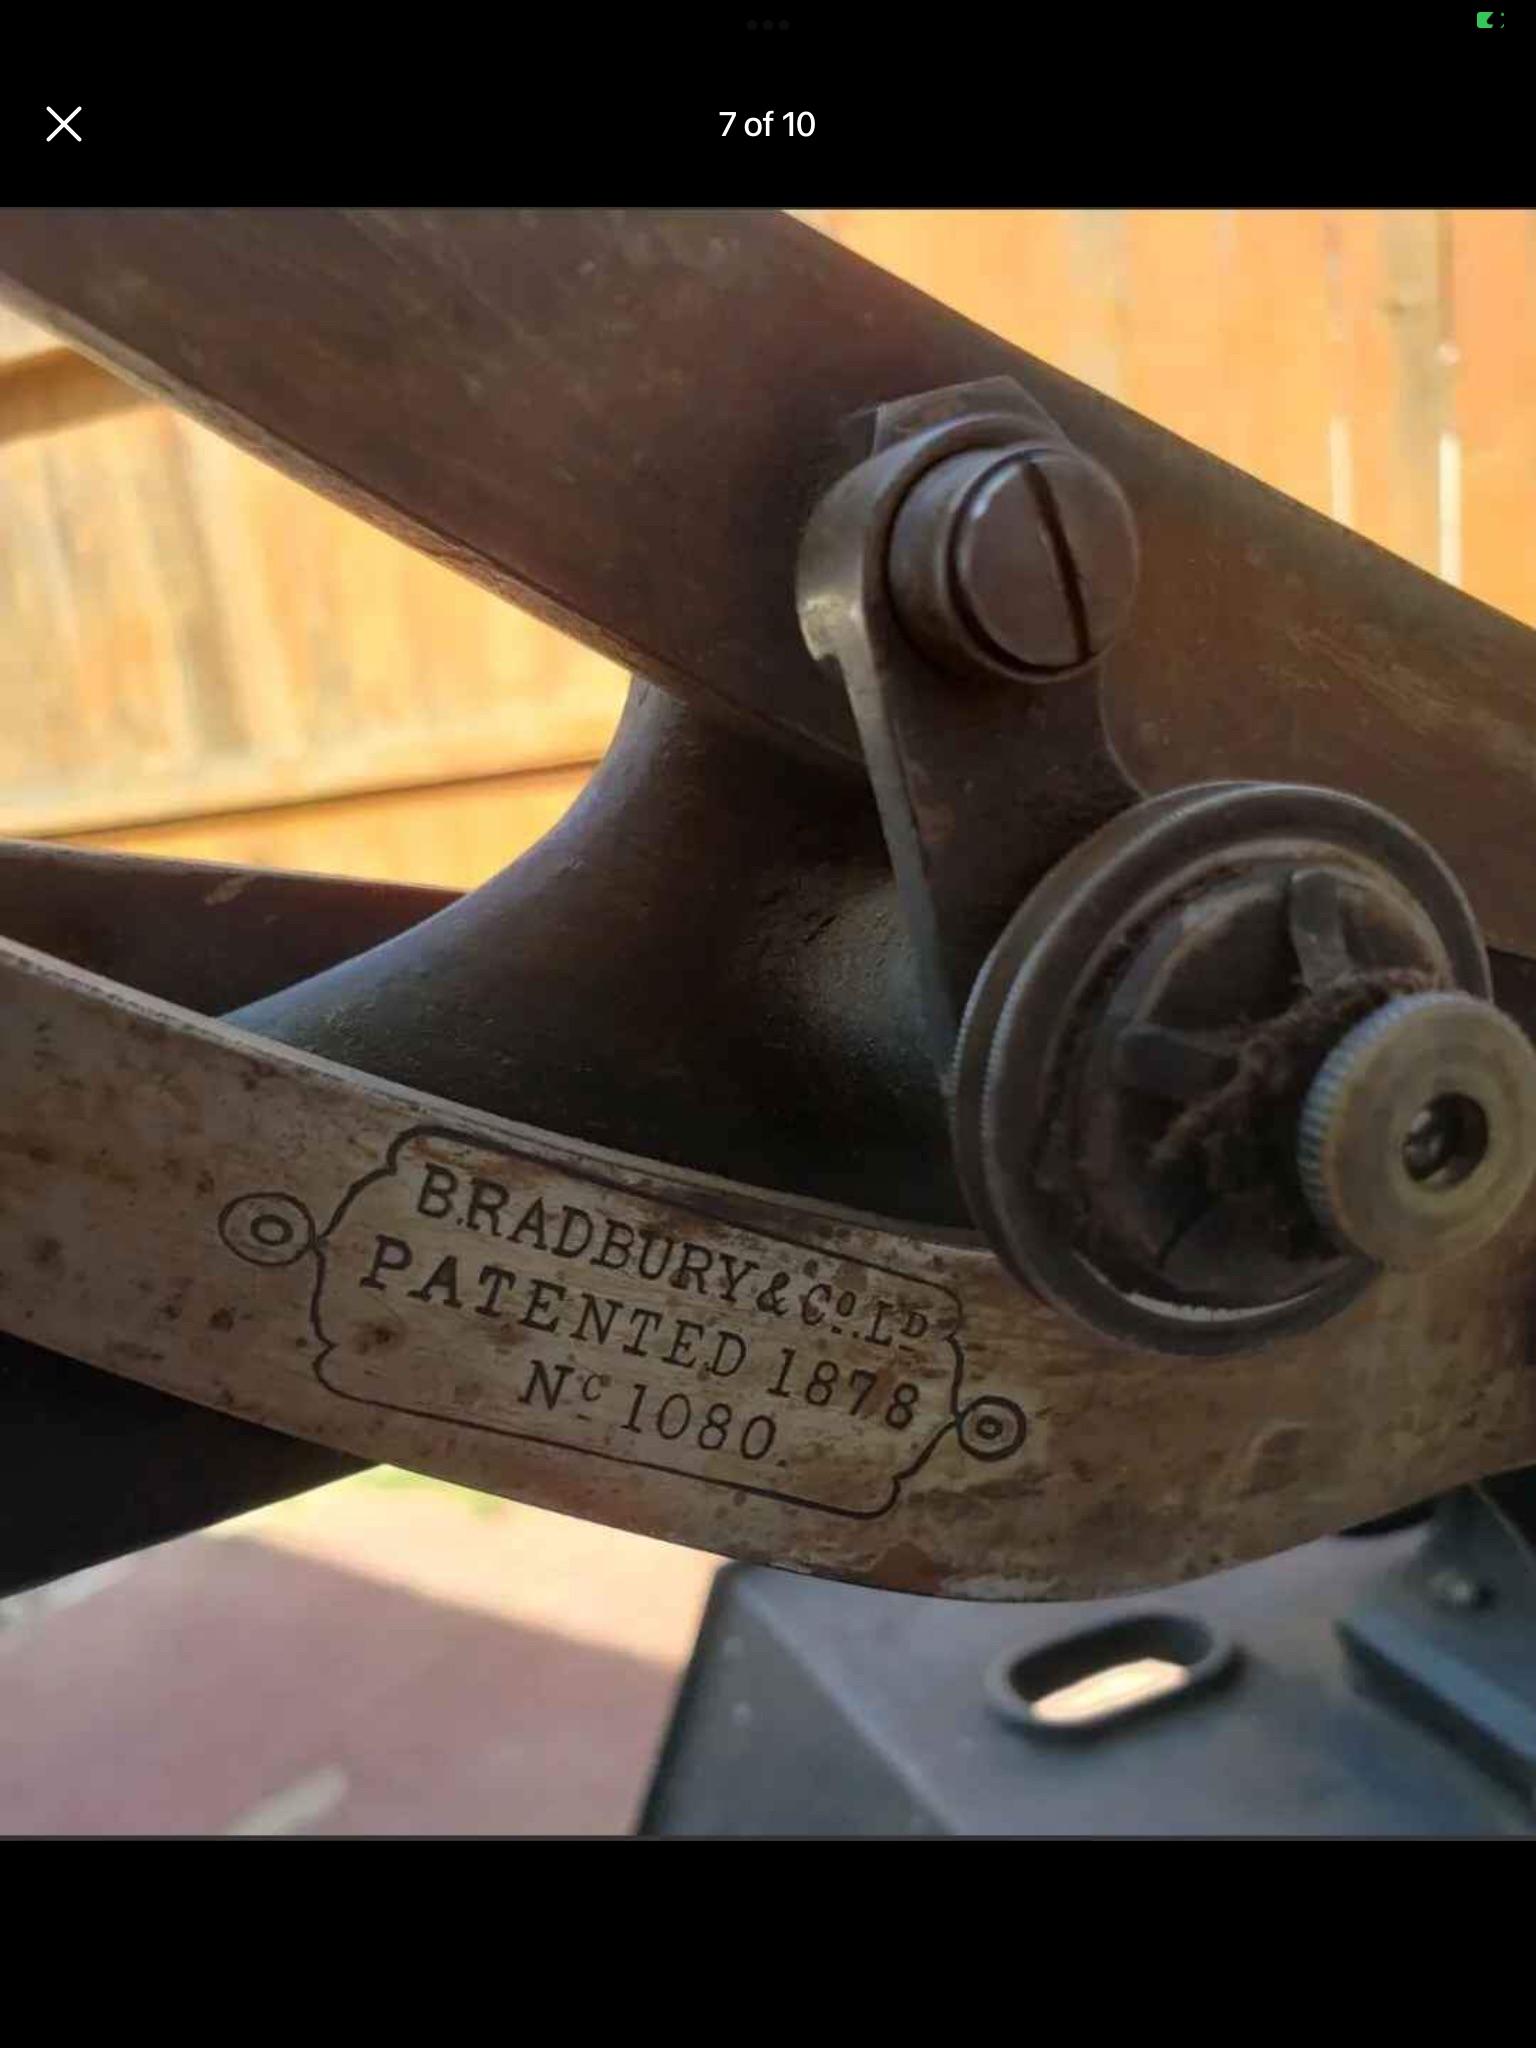 Refinishing an antique sewing machine table - by Glenn Huovinen